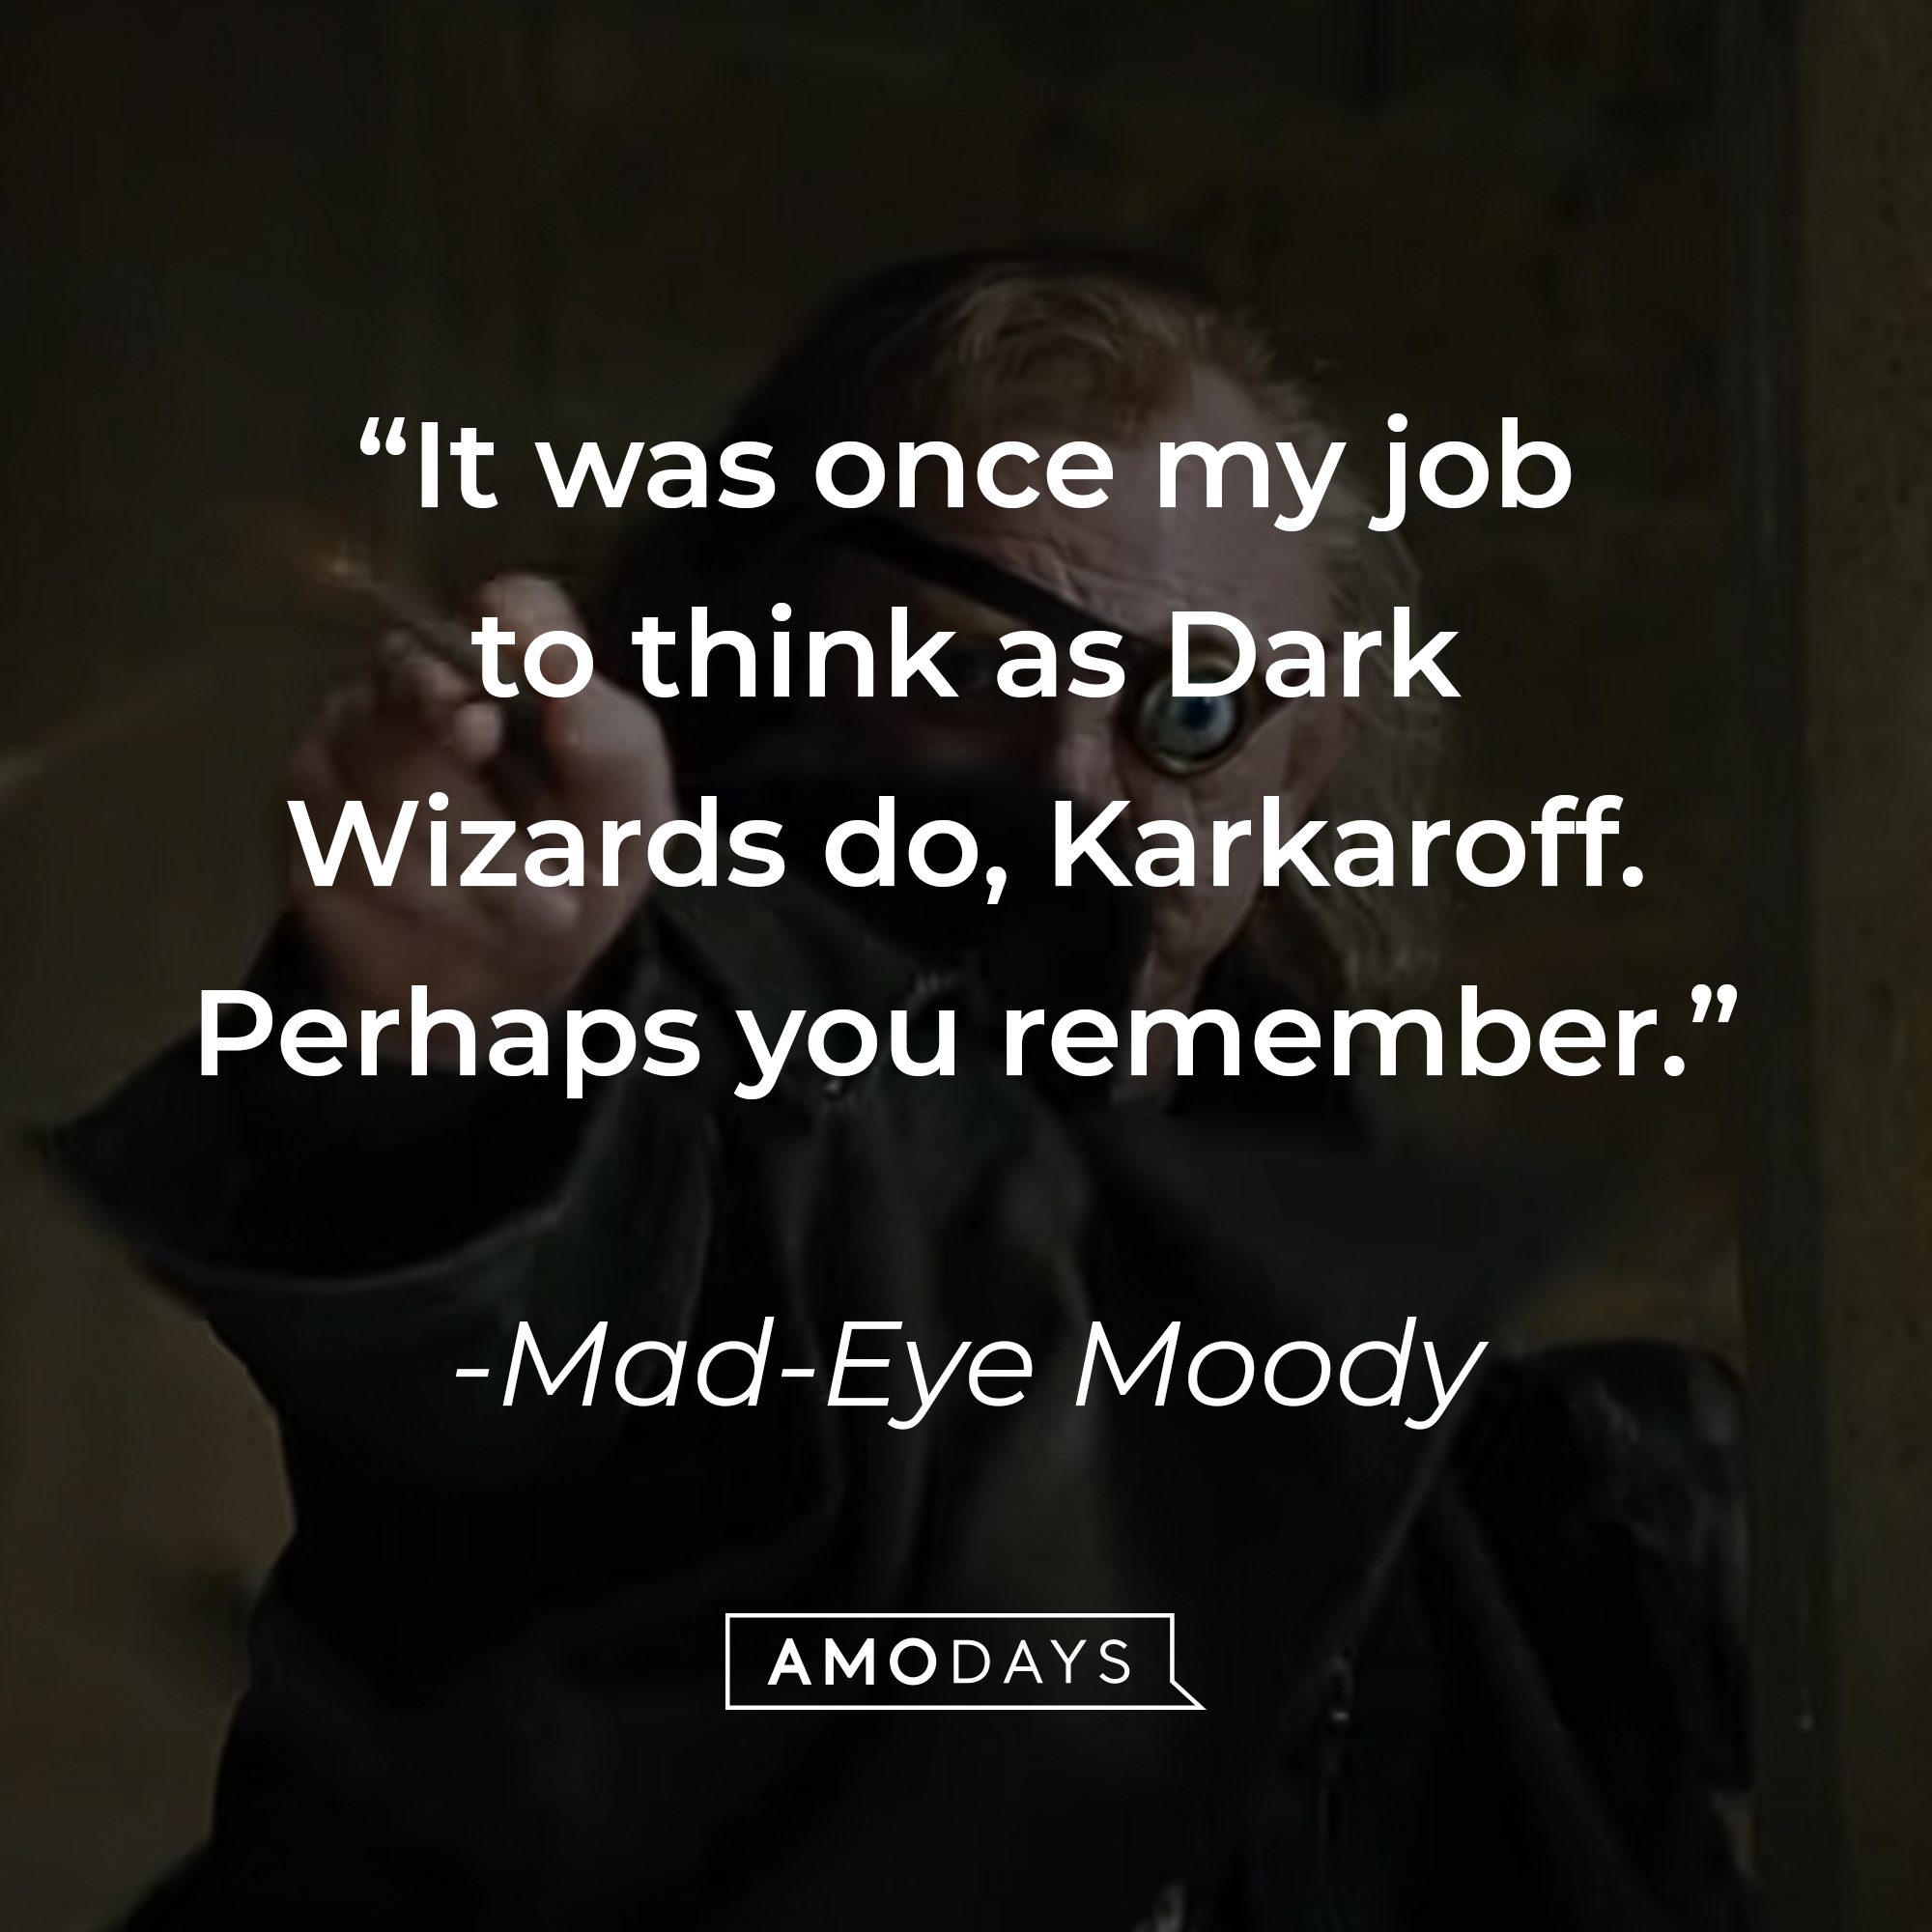 Mad-Eye Moody's quote: "It was once my job to think as Dark Wizards do, Karkaroff. Perhaps you remember." | Source: youtube.com/harrypotter